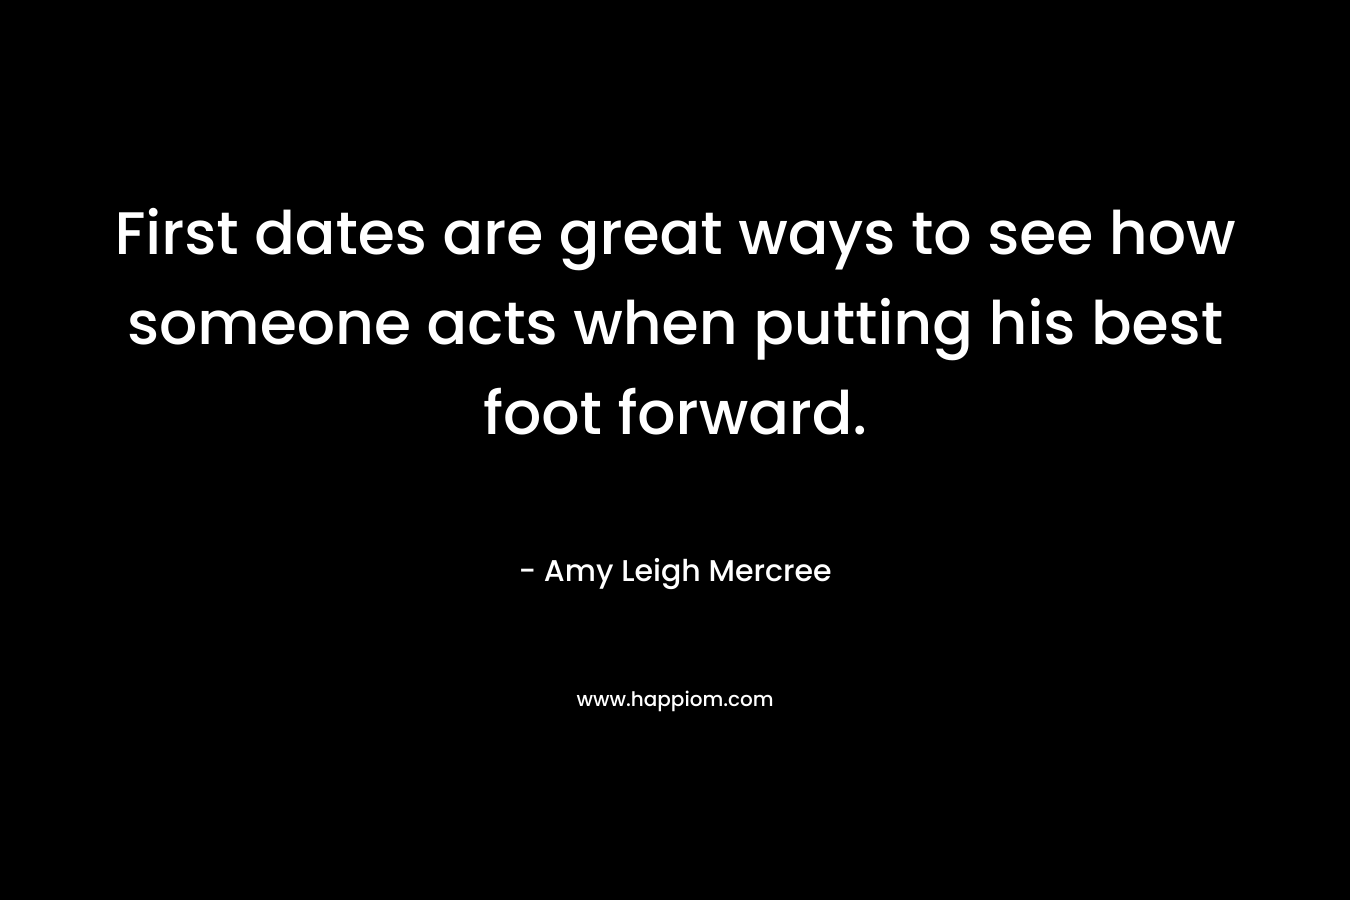 First dates are great ways to see how someone acts when putting his best foot forward. – Amy Leigh Mercree